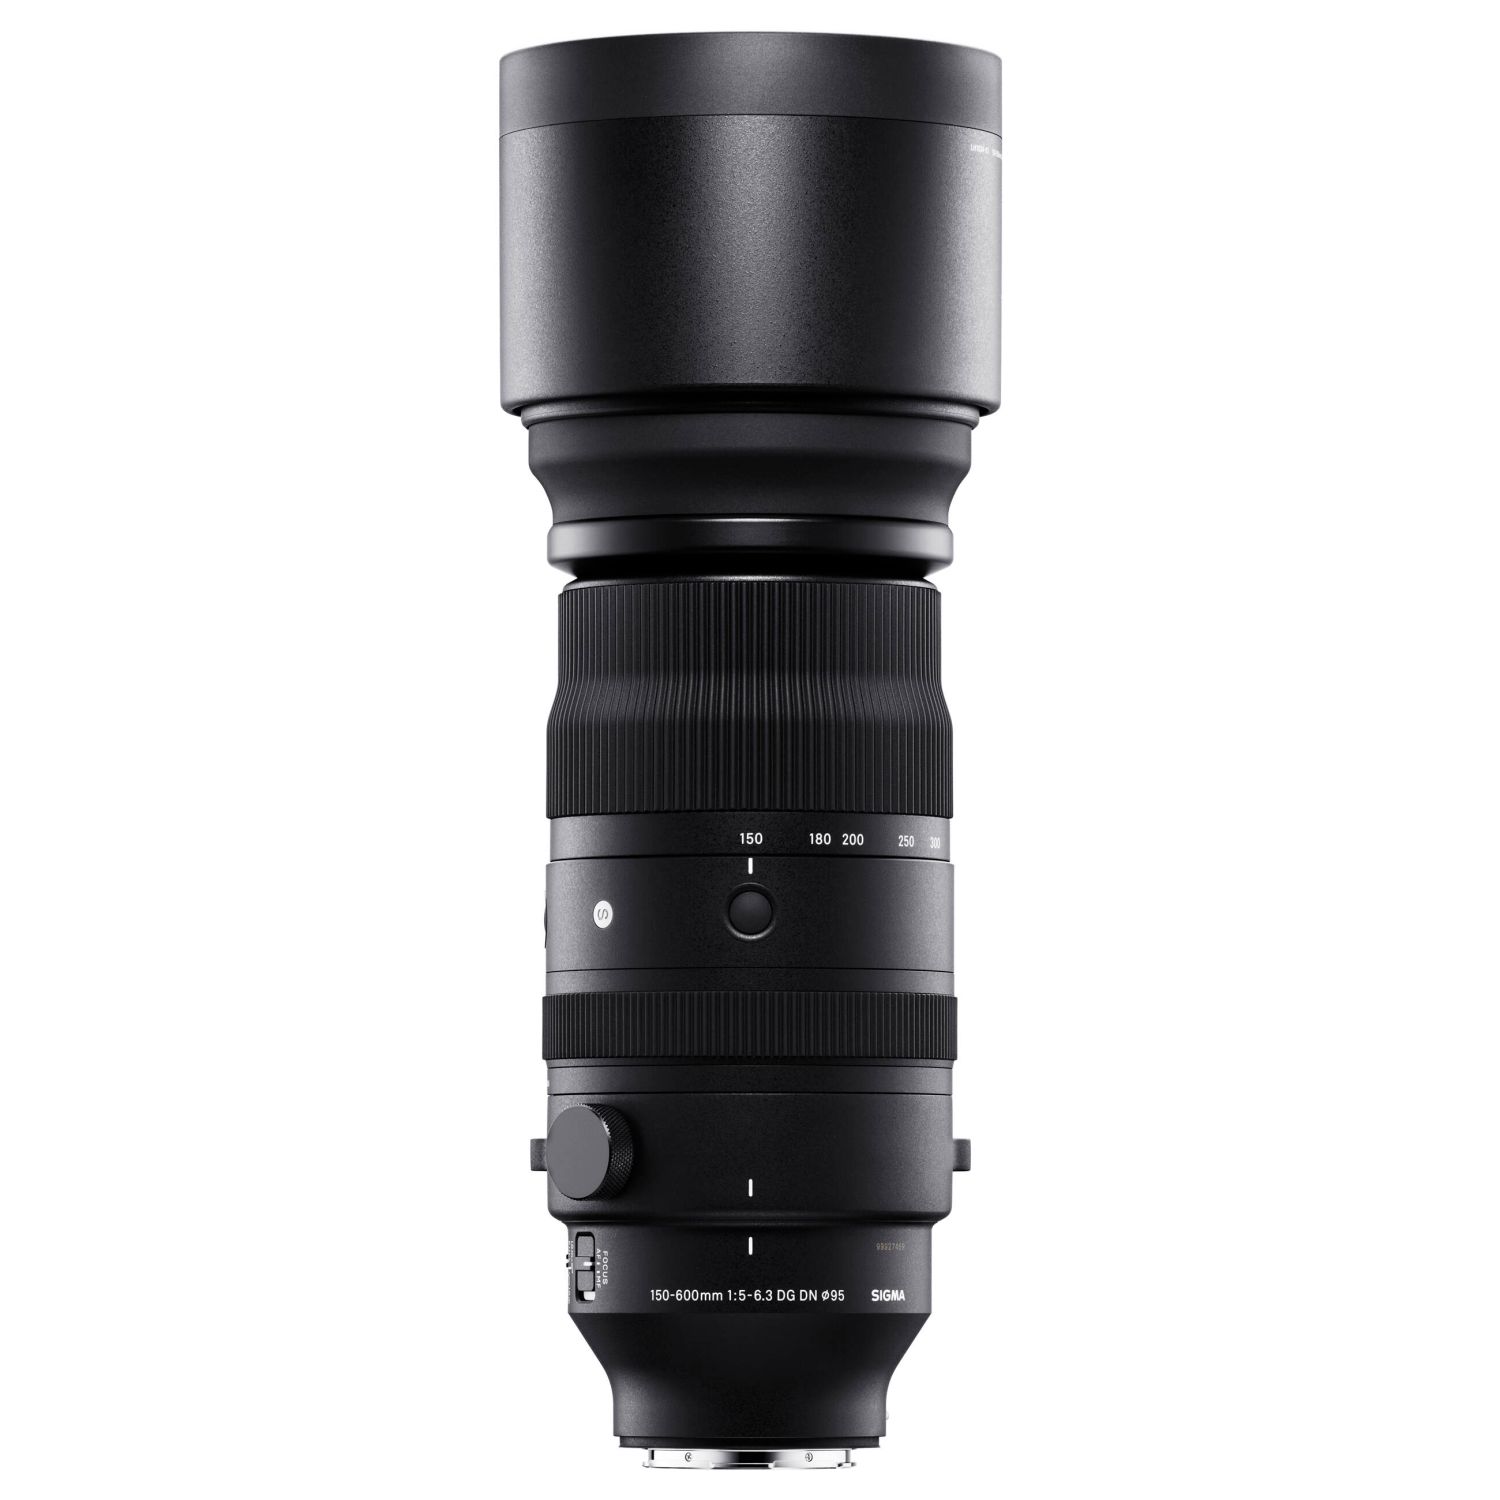 Sigma 150-600mm f/5-6.3 DG DN OS Sports Lens for Sony E-Mount